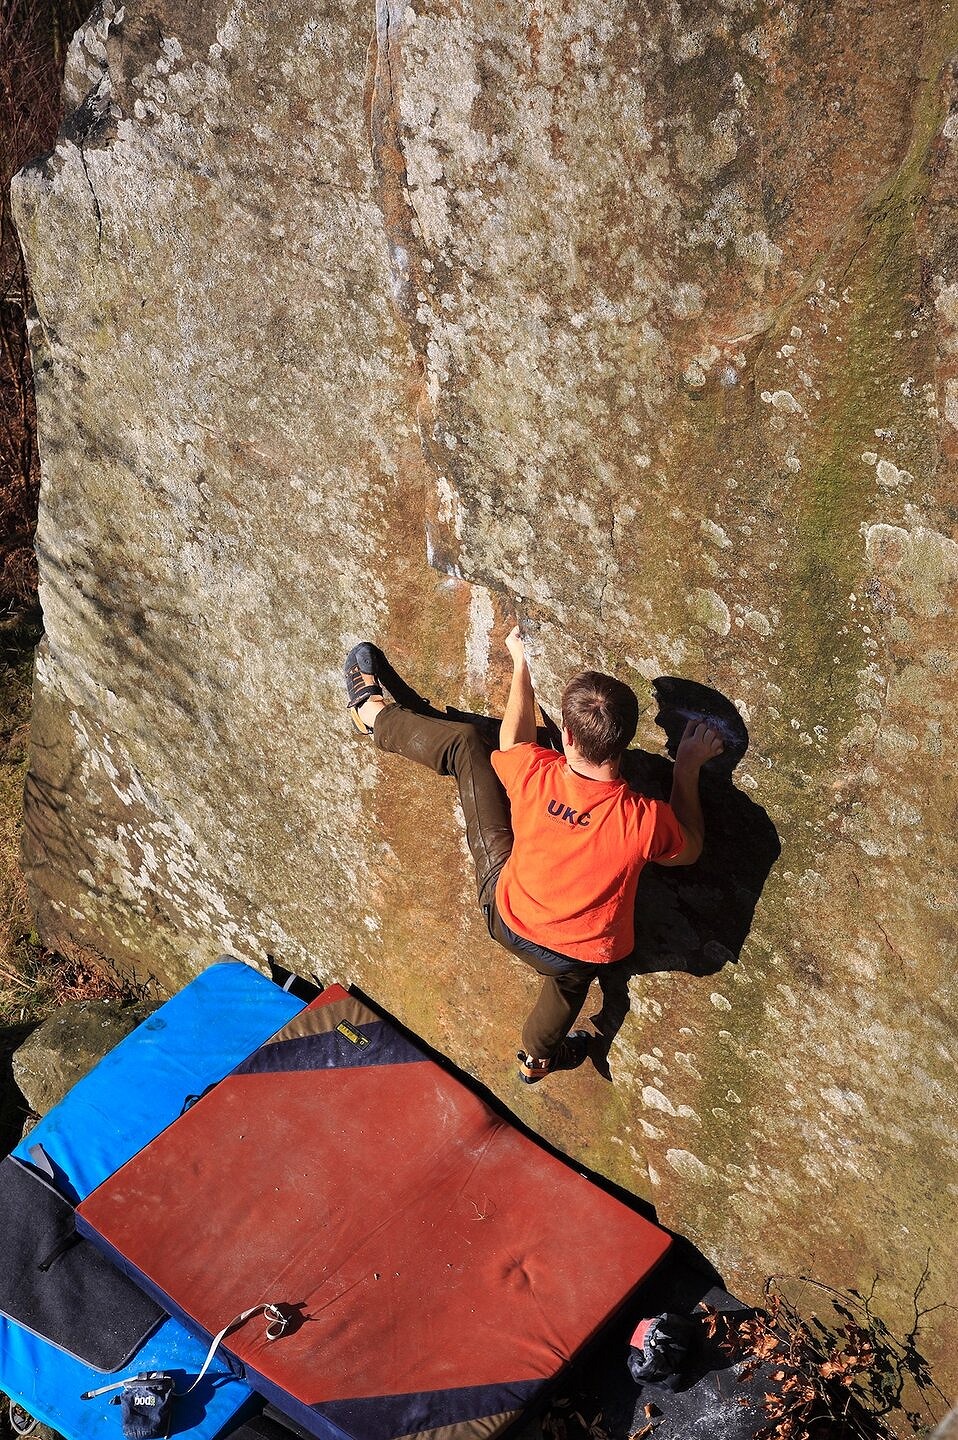 Theo Moore on The Art of White Hat Wearing (7B), Curbar  © Mike Hutton